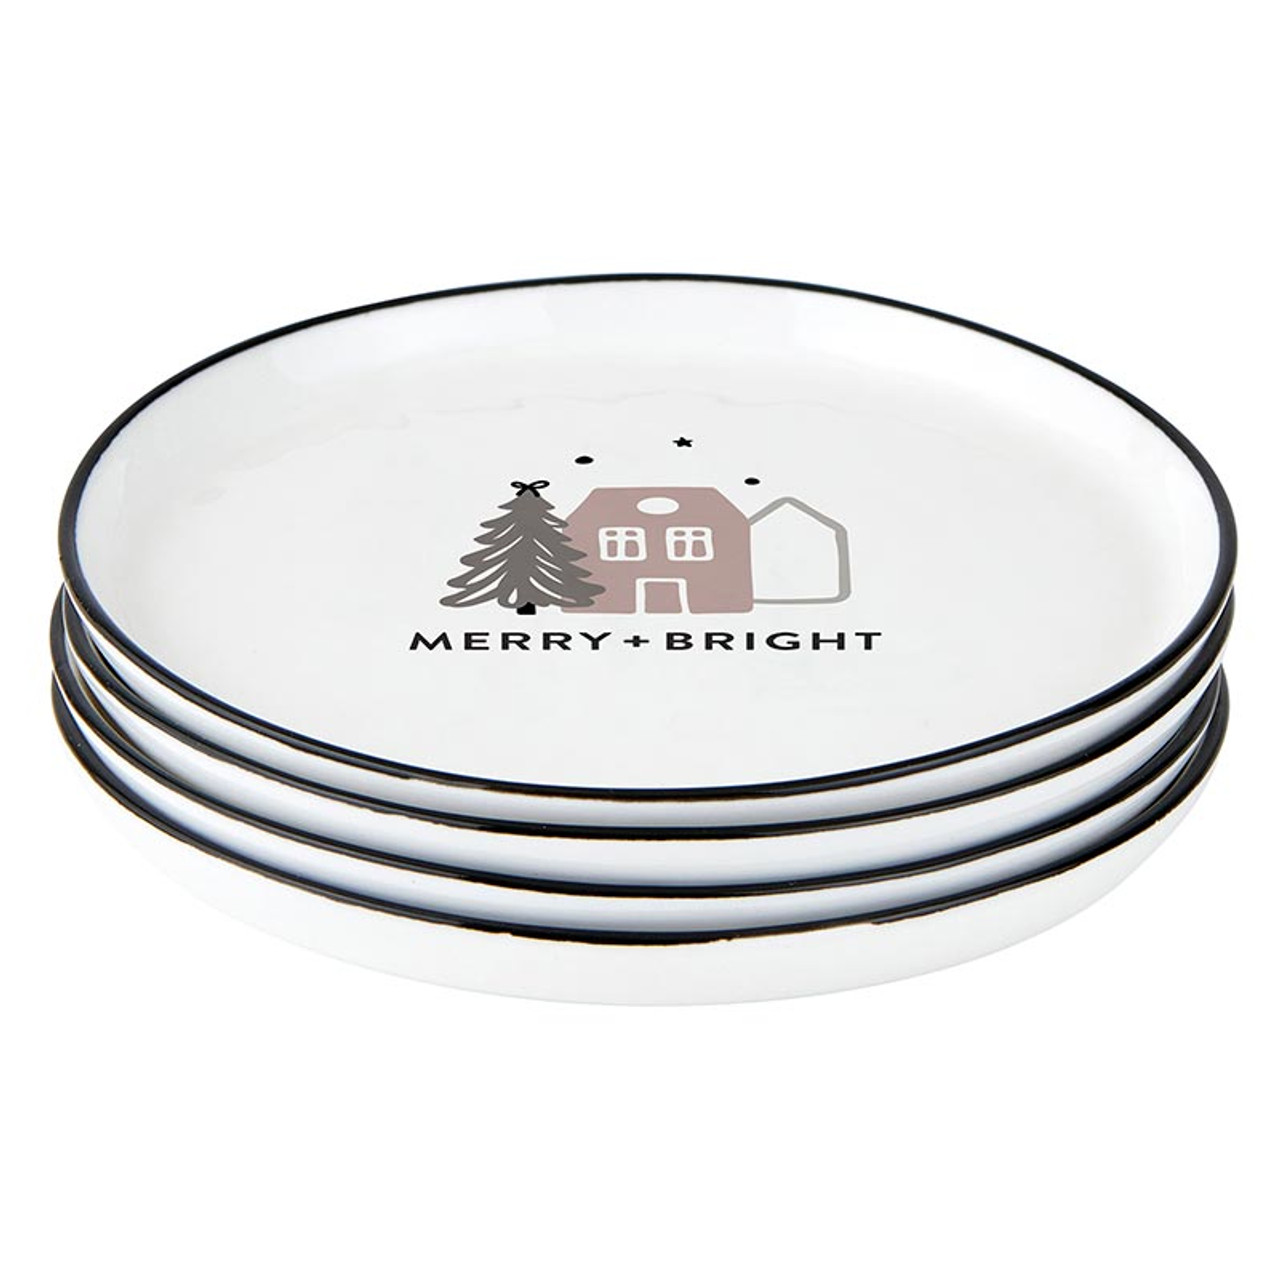 Paper plate and appetizers plate, bowl or napkin dispenser